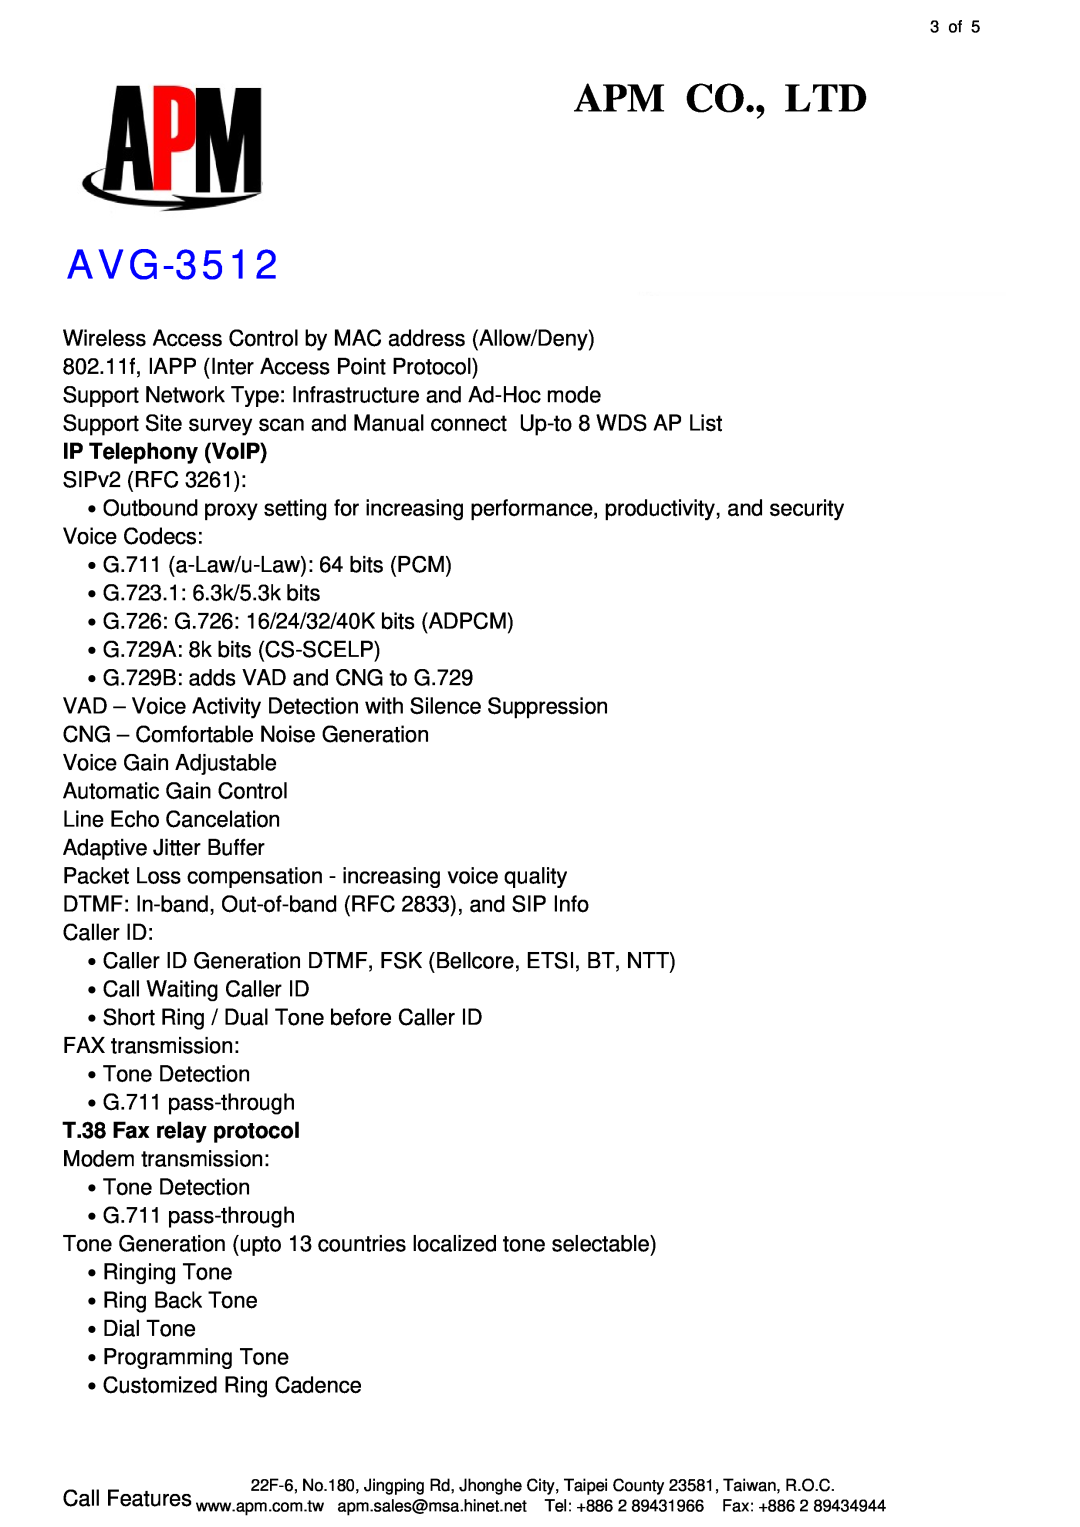 APM AVG-3512 manual IP Telephony VoIP, T.38 Fax relay protocol 